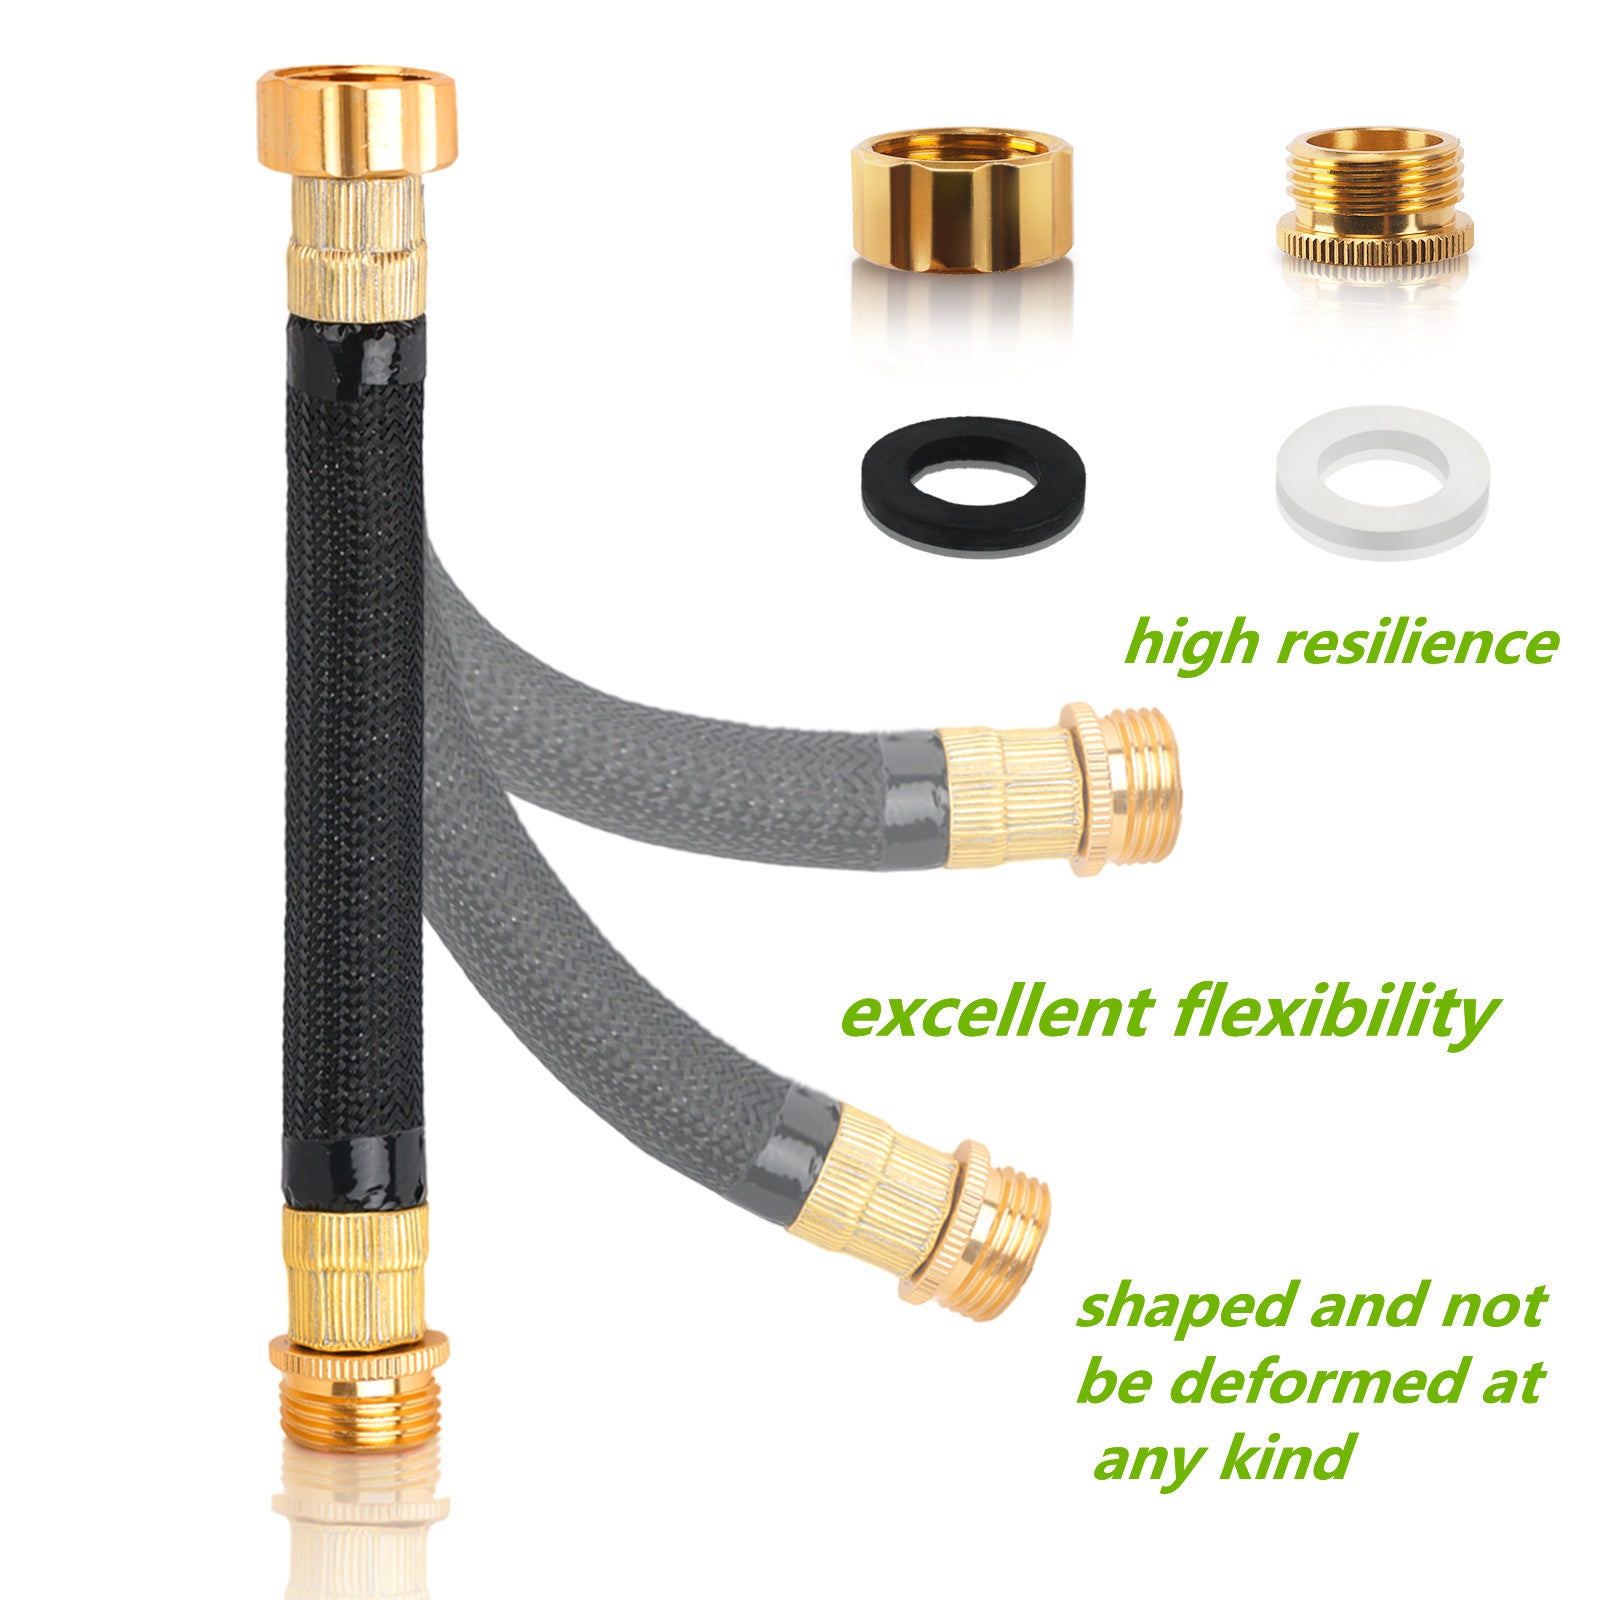  persevere Upgraded Water Hose Extension Adapter, Garden Hose  Connector, 10 ft Lead-in Hose, Anti-Kink Design with Integrated Spiral  Tube,for Hose Reel/RV/Dehumidifier, Durable/Drinking Water Safe :  Everything Else